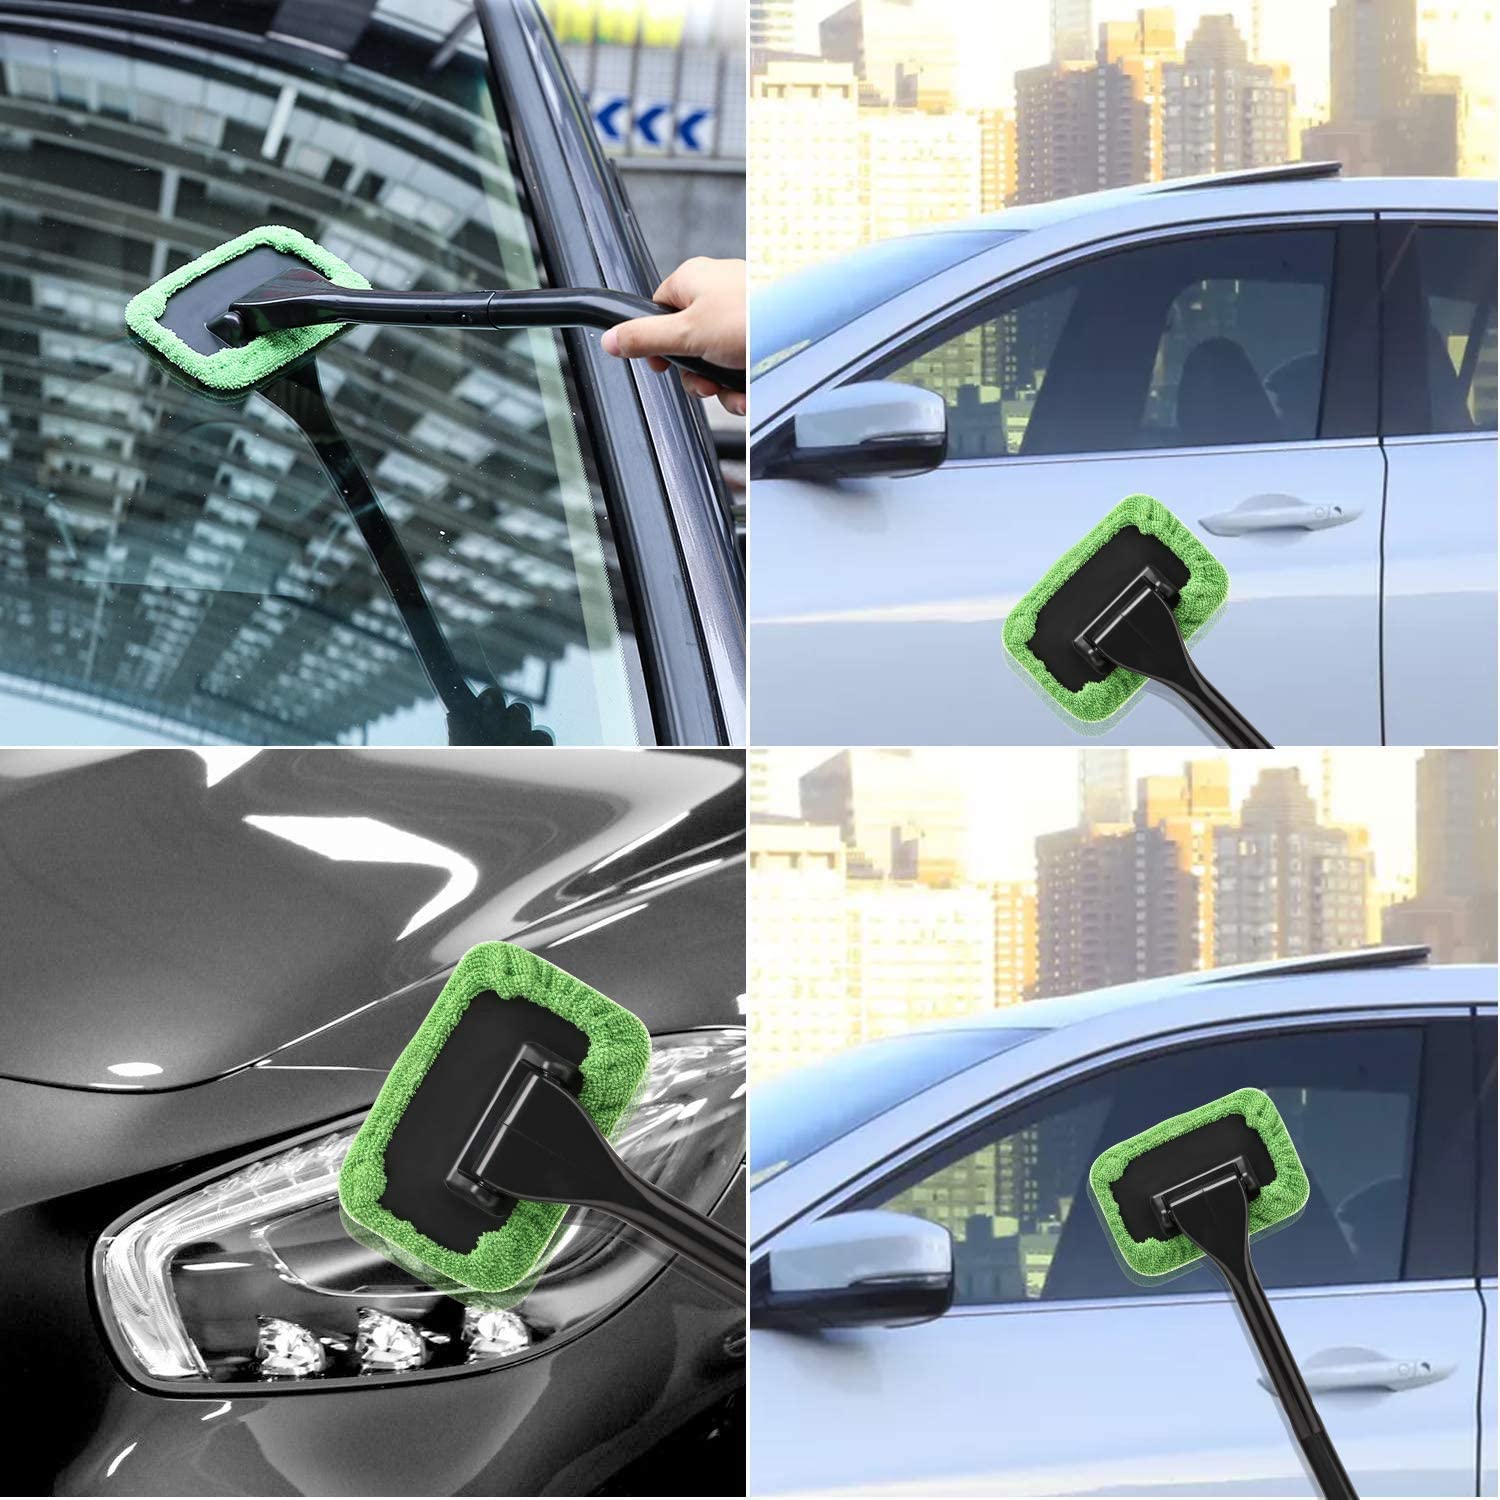 Teancll Windshield Cleaning Tool Car Window Cleaner Wipes Interior Exterior Cleaning Brush with Extendable Handle 180° Swiveled Triangular Head Microfiber Cloth and Spray Bottle 